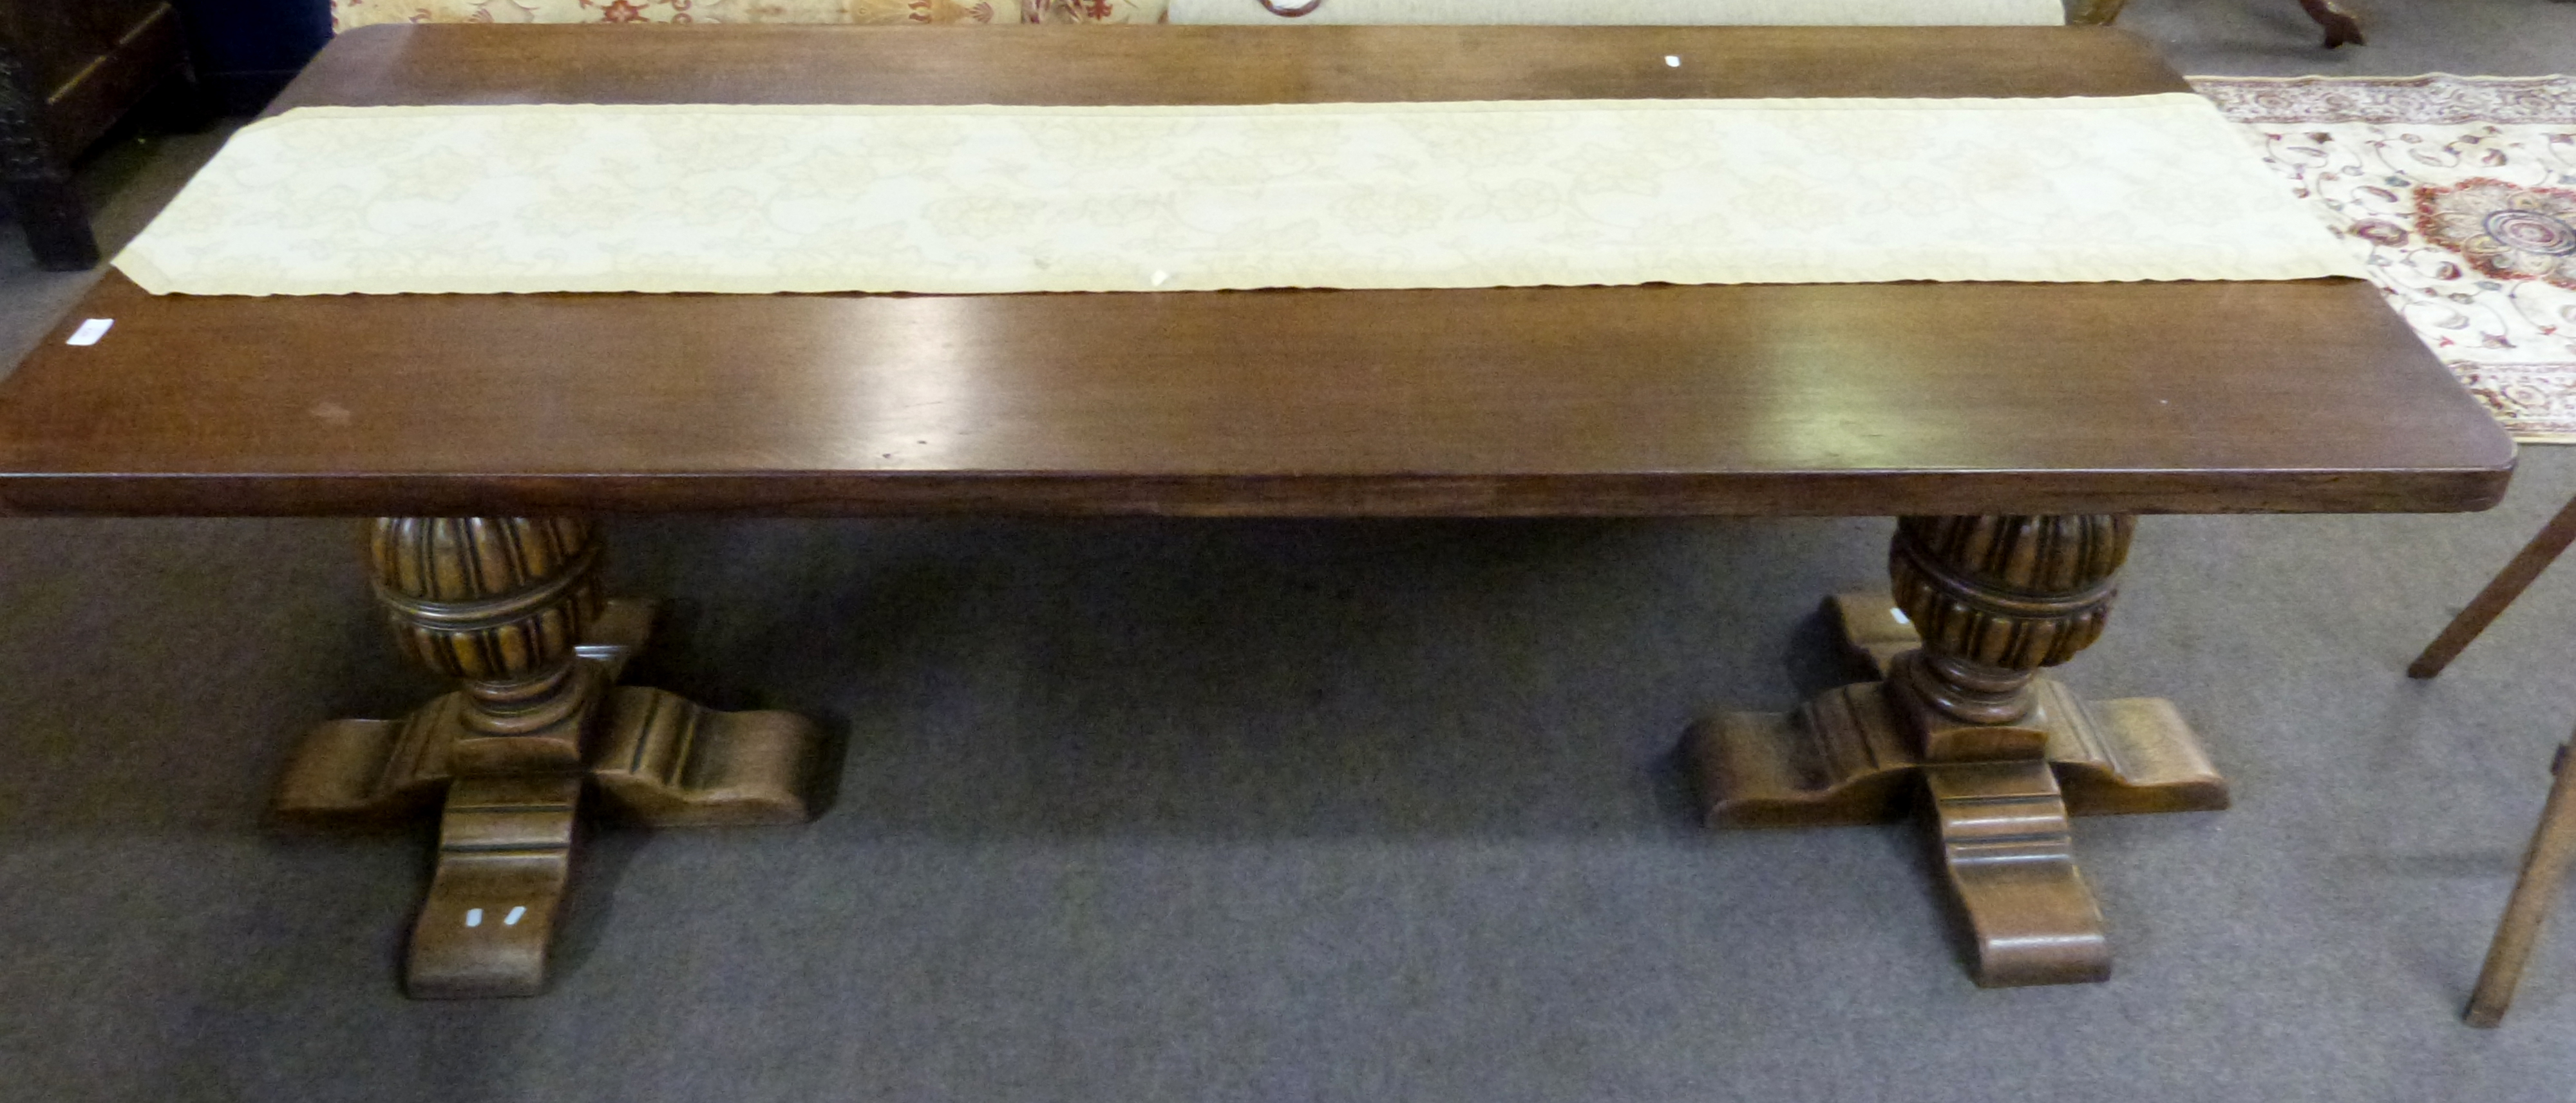 20th century solid oak small refectory dining table with plain three-section top supported on two - Image 2 of 3